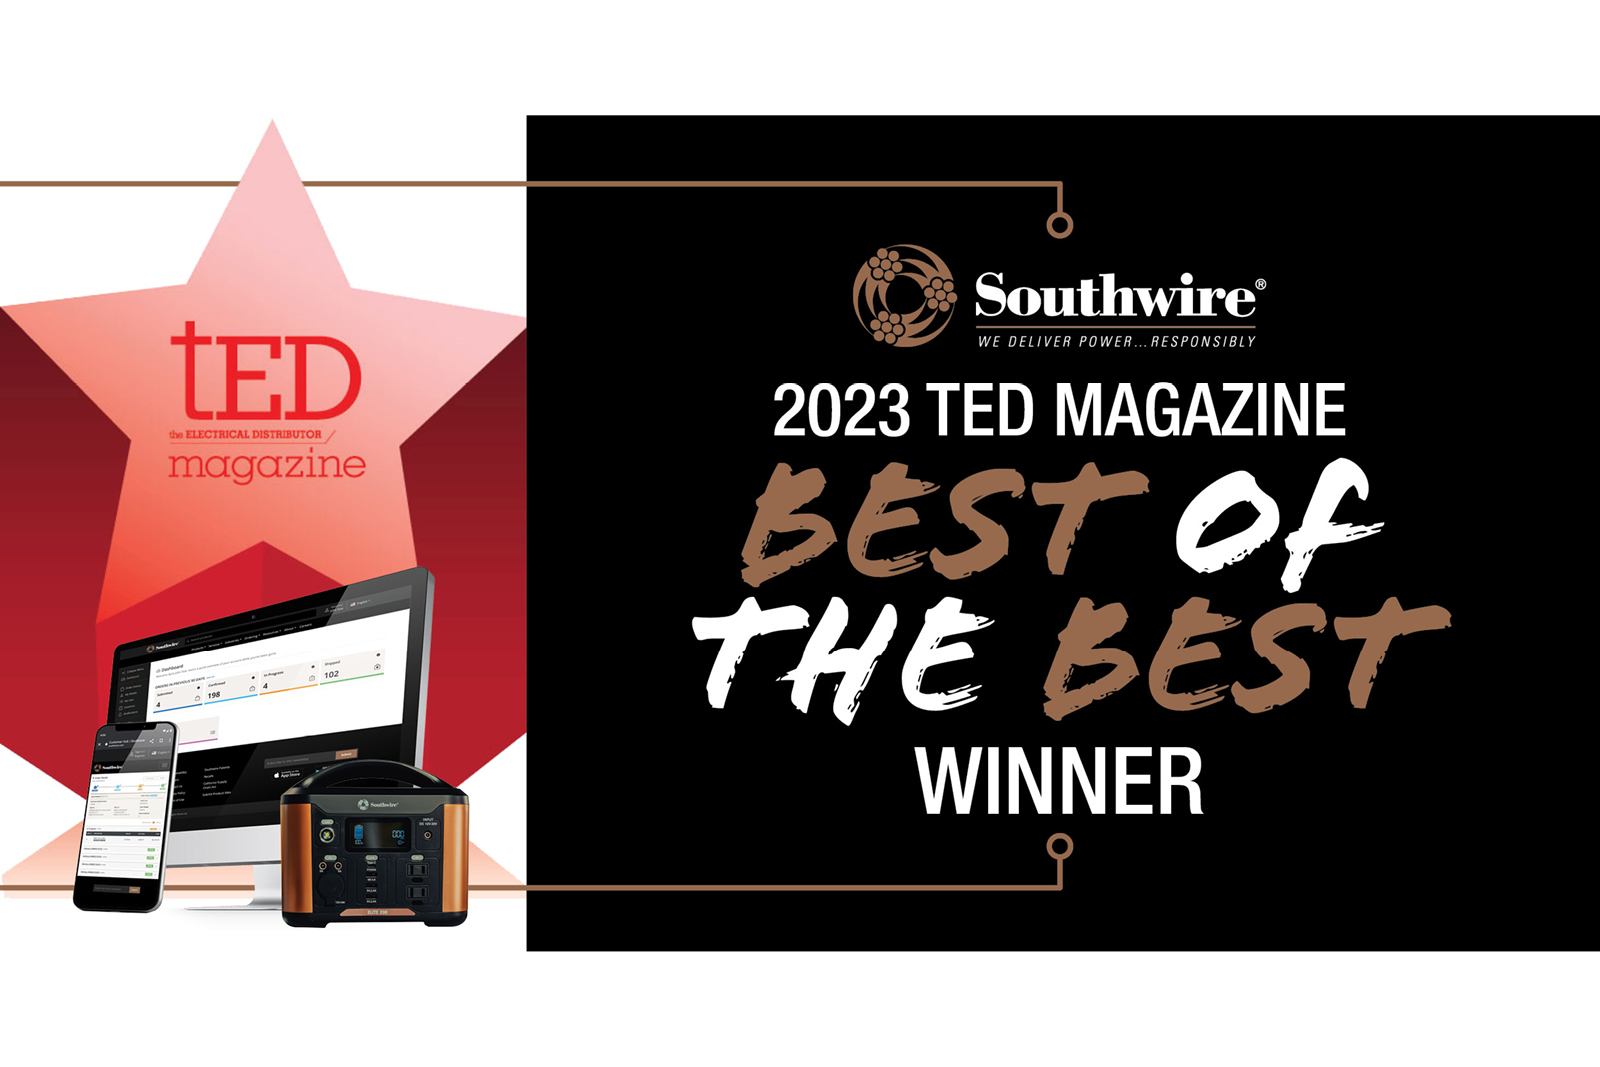 Southwire Wins tED Magazine Best of the Best Marketing Award, Honorable Mention